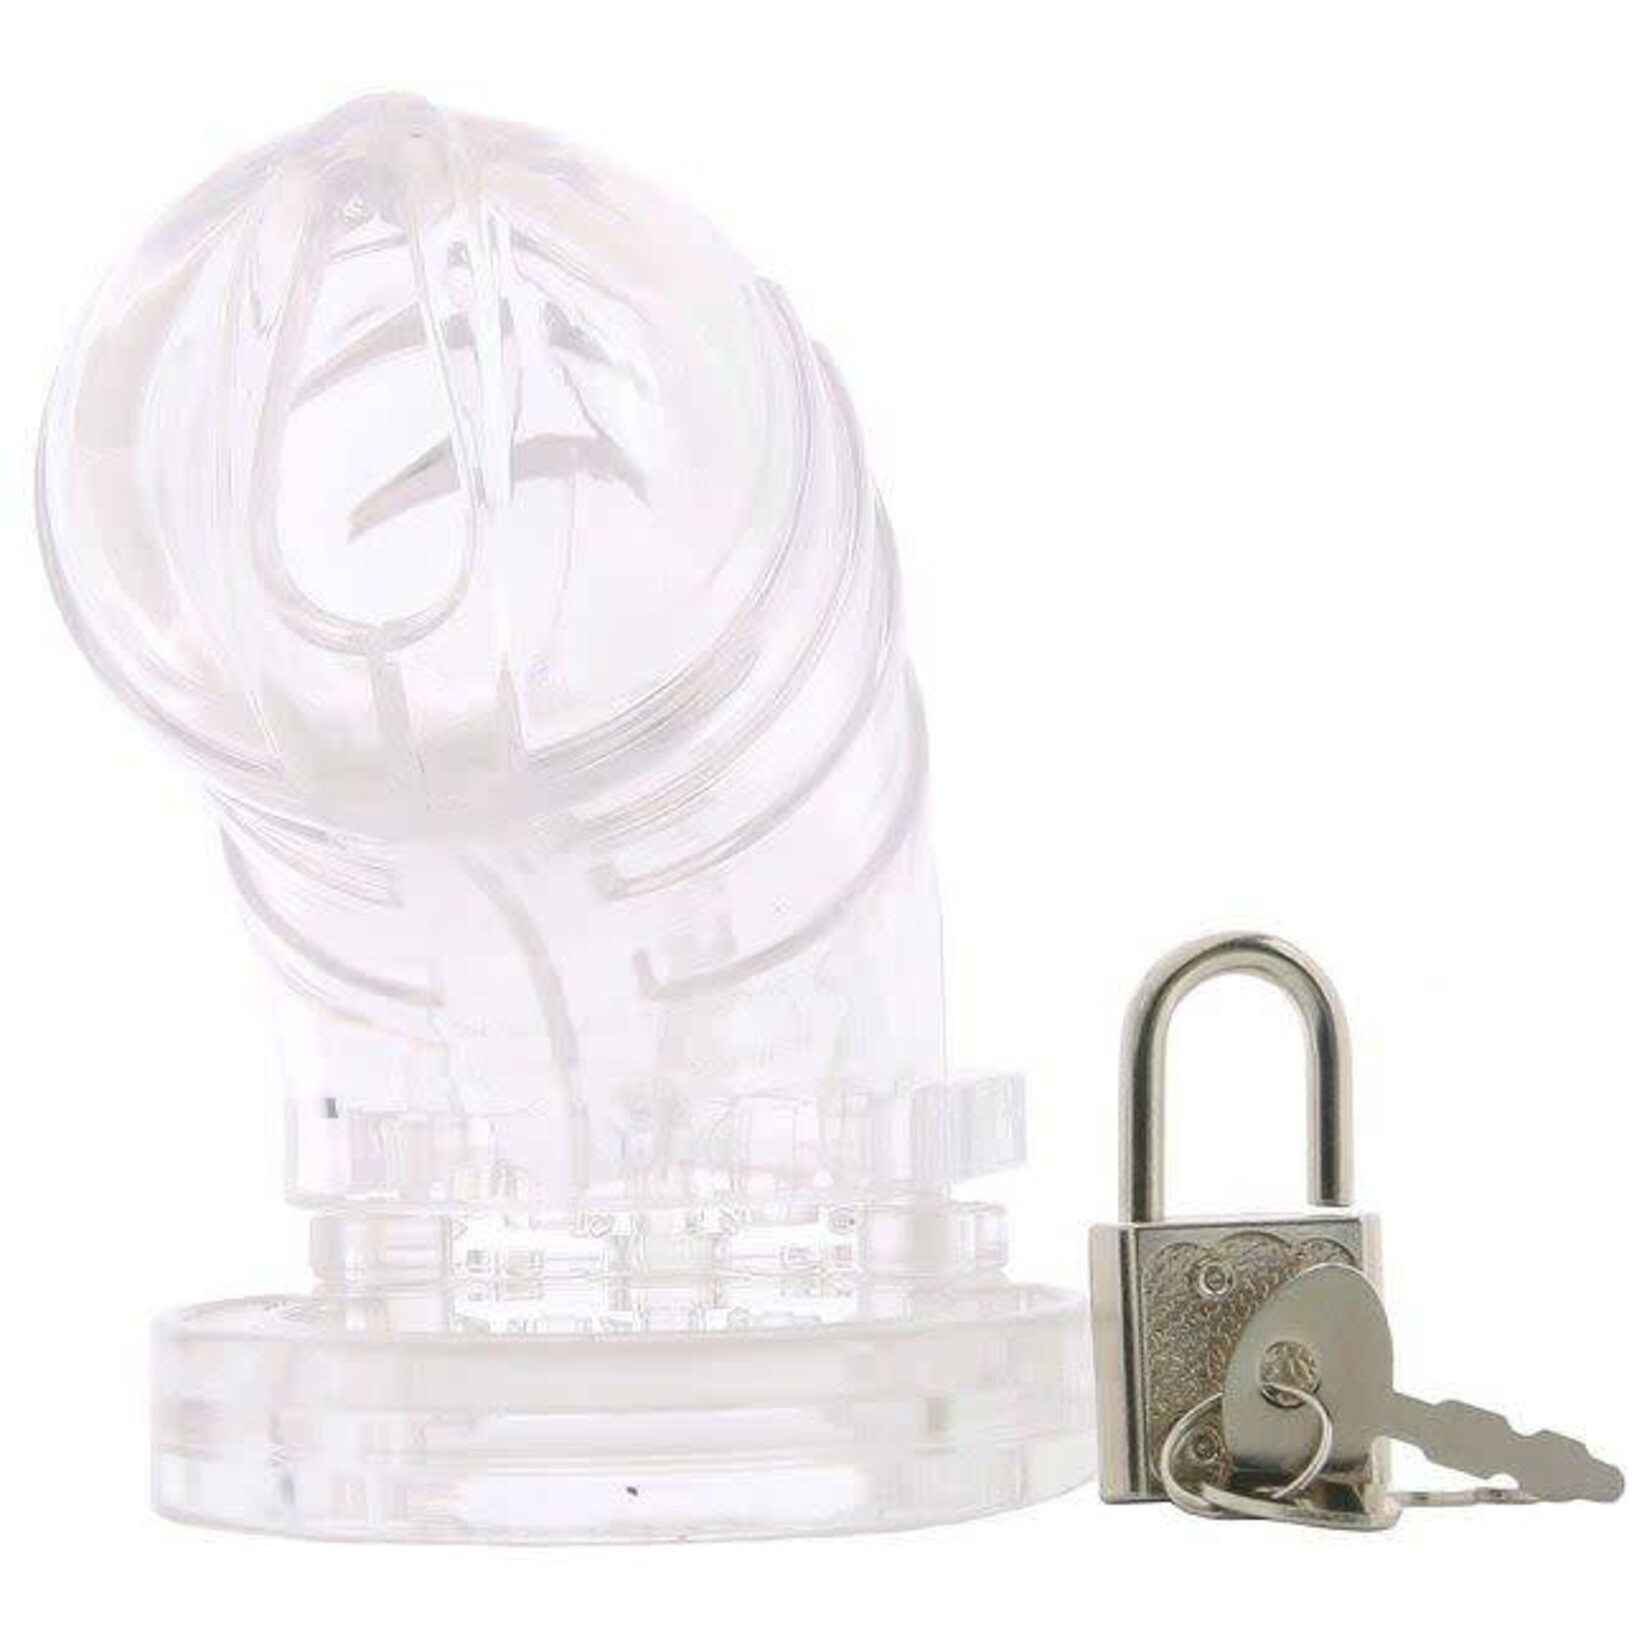 Shots America Man|Cage 04 4.5" Chastity Device